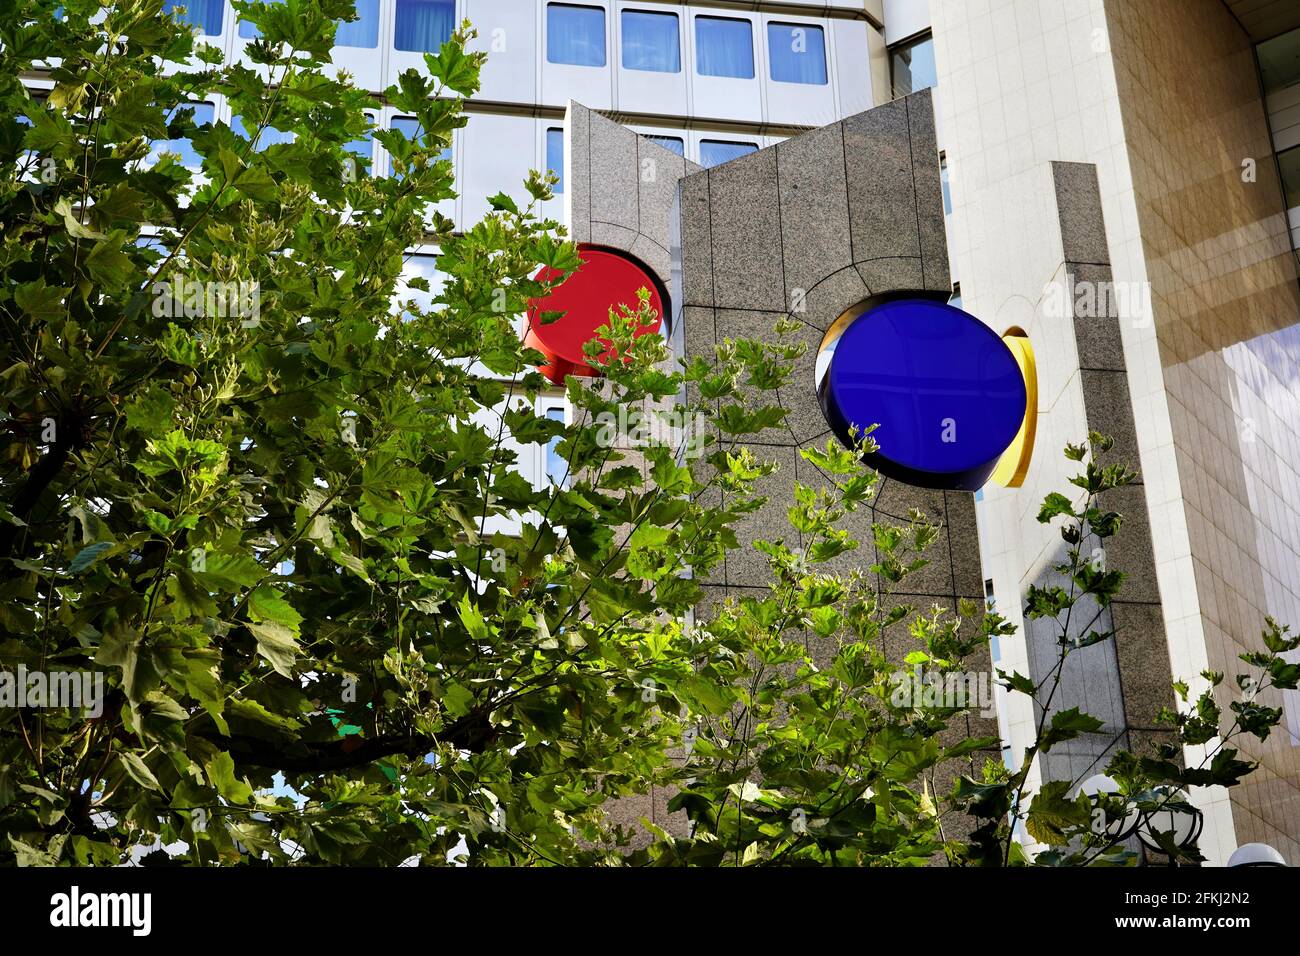 Exterior view of the Japanese Hotel Nikko / German-Japanese Center in downtown Düsseldorf with its unique colourful lamps. Stock Photo